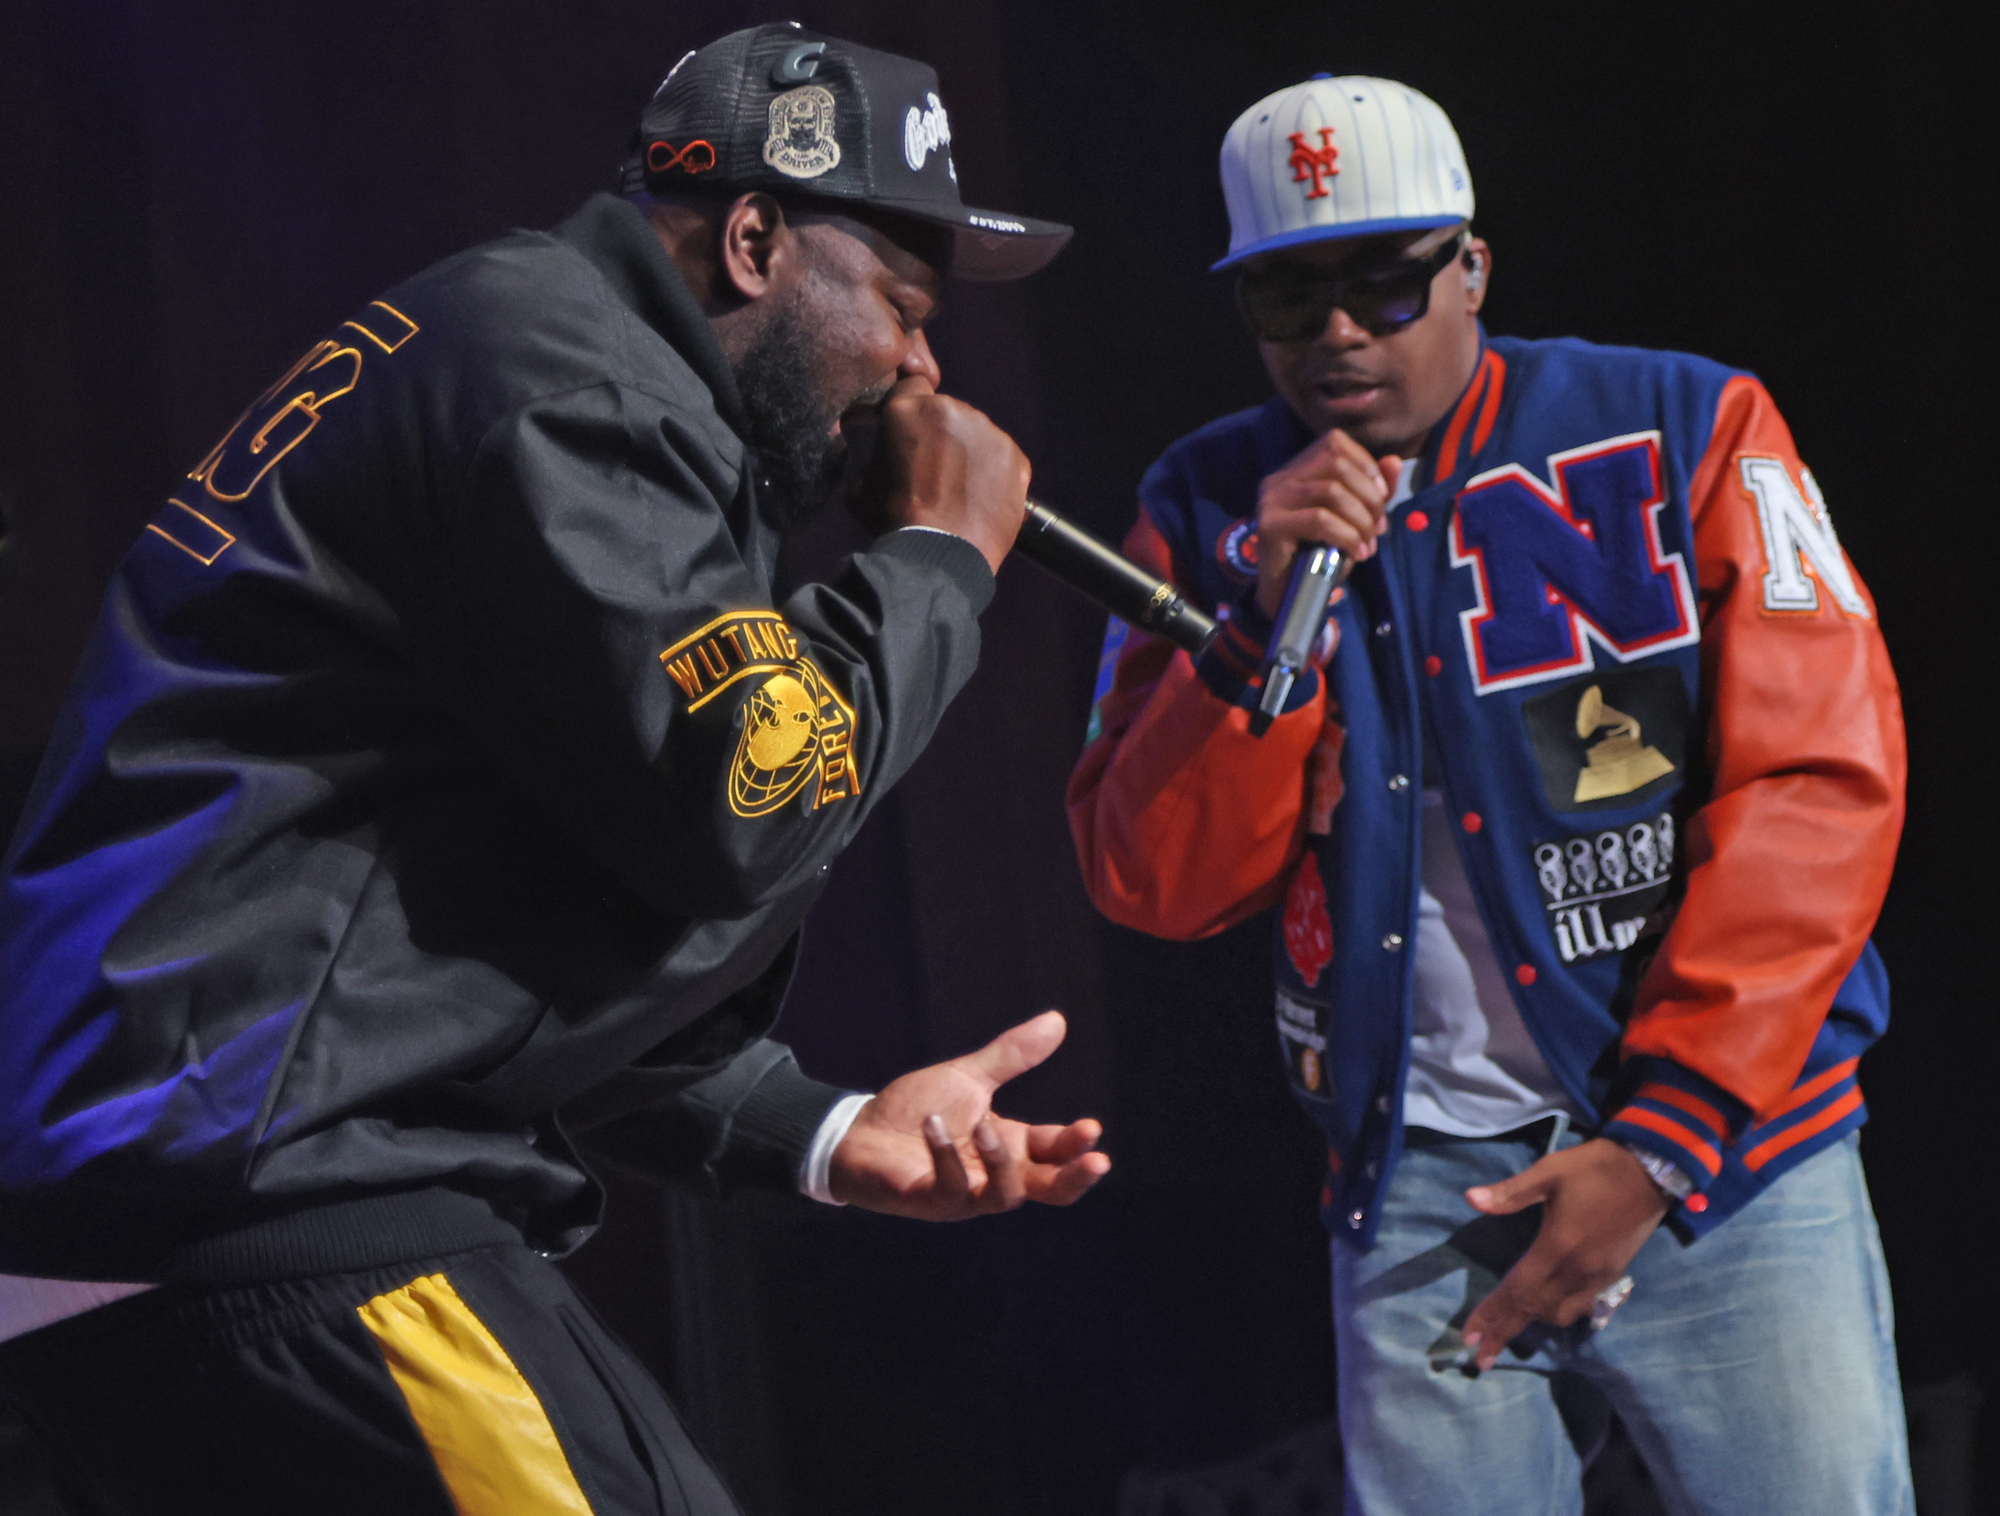 Nas, WuTang Clan’s tour is the utopia hiphop heads dream of (Photos)